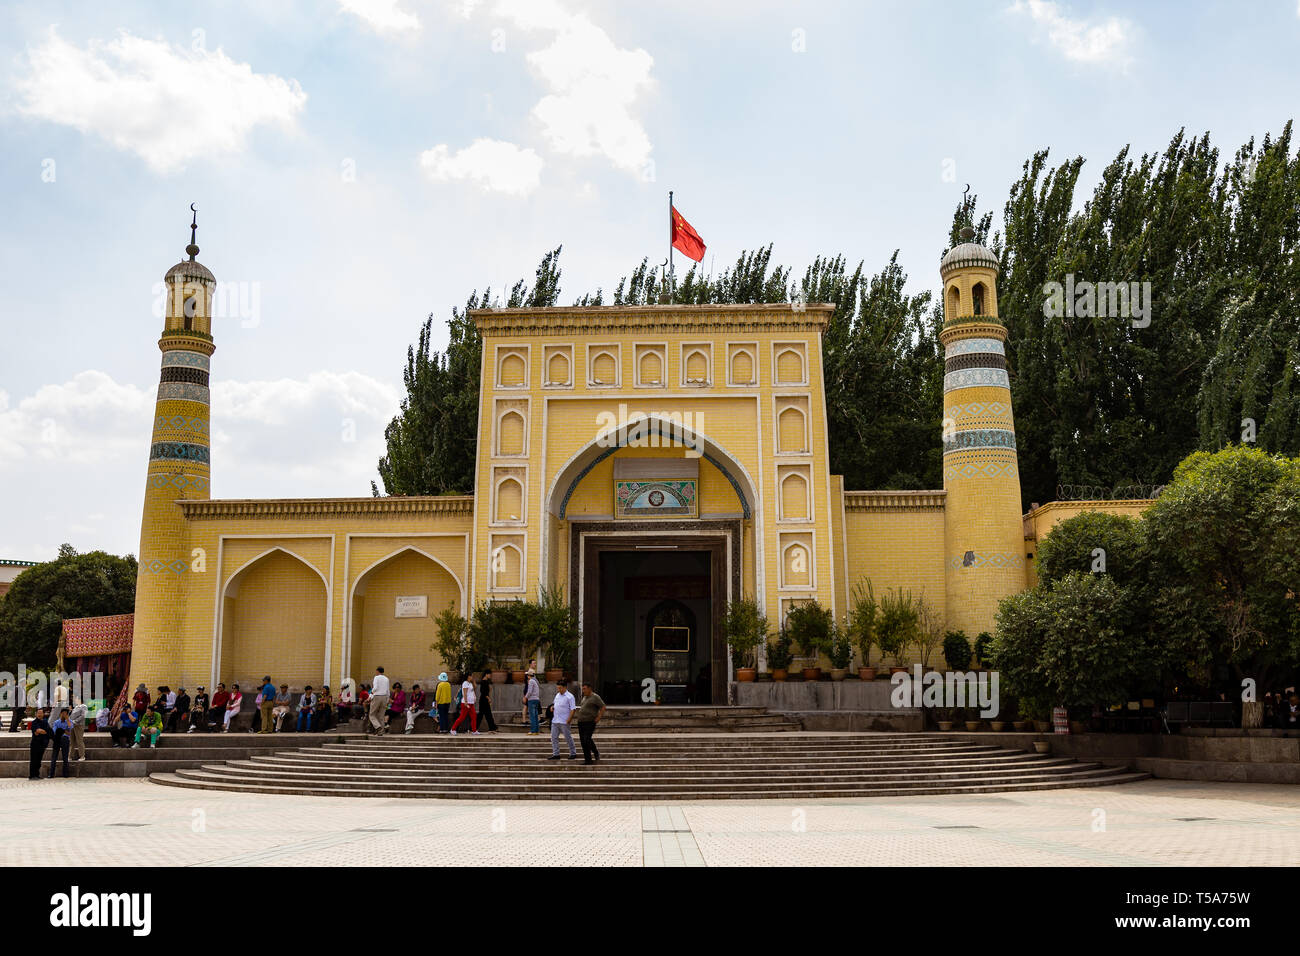 Aug 2017, Kashgar, Xinjiang, China: view of Id Kah Mosque, the most famous attractions in Kashgar Ancient Town. Built in 1442, it is the largest mosqu Stock Photo